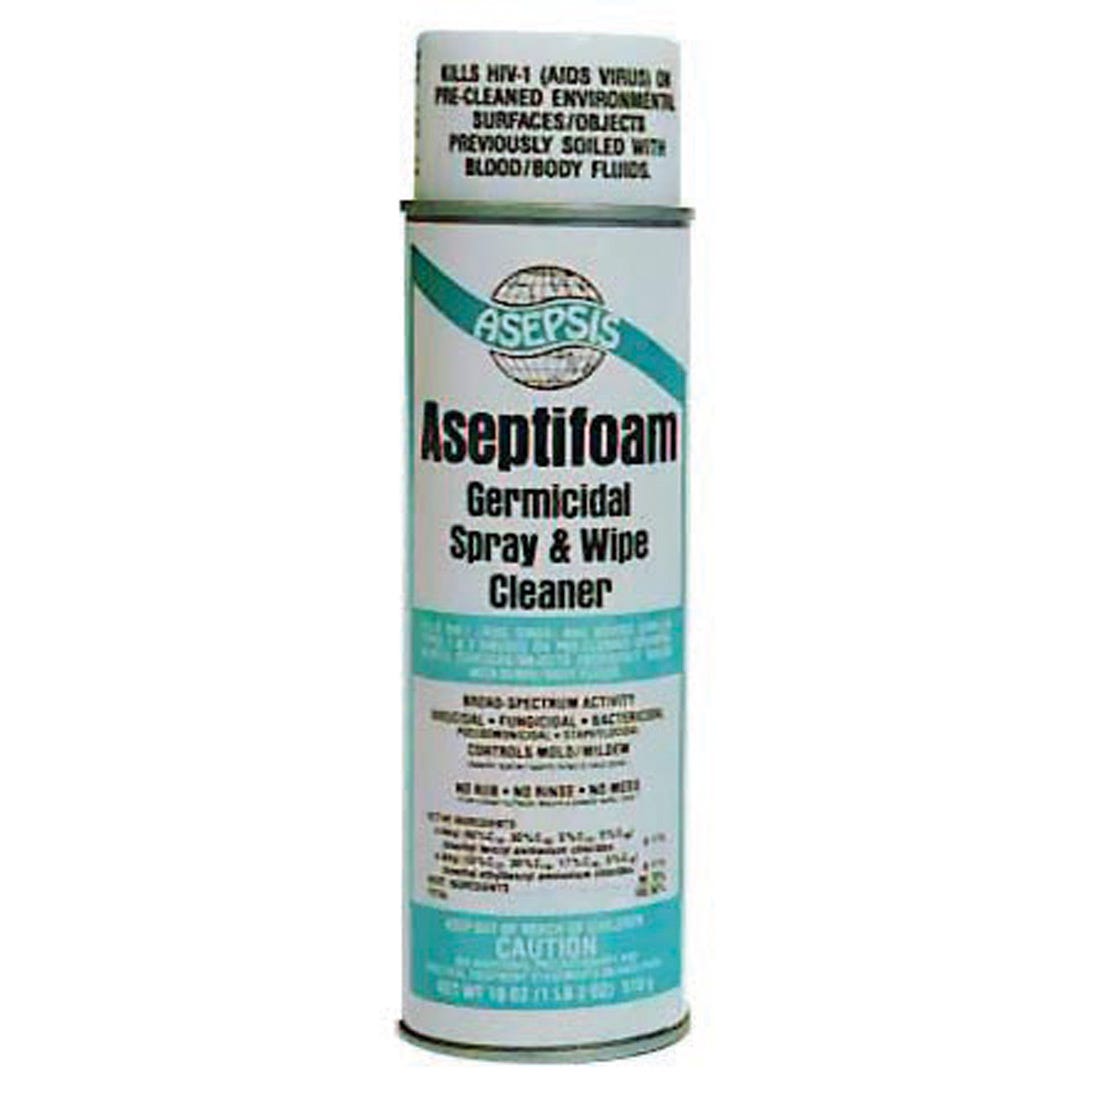 Aseptifoam Germicidal Spray and Wipe Cleaner